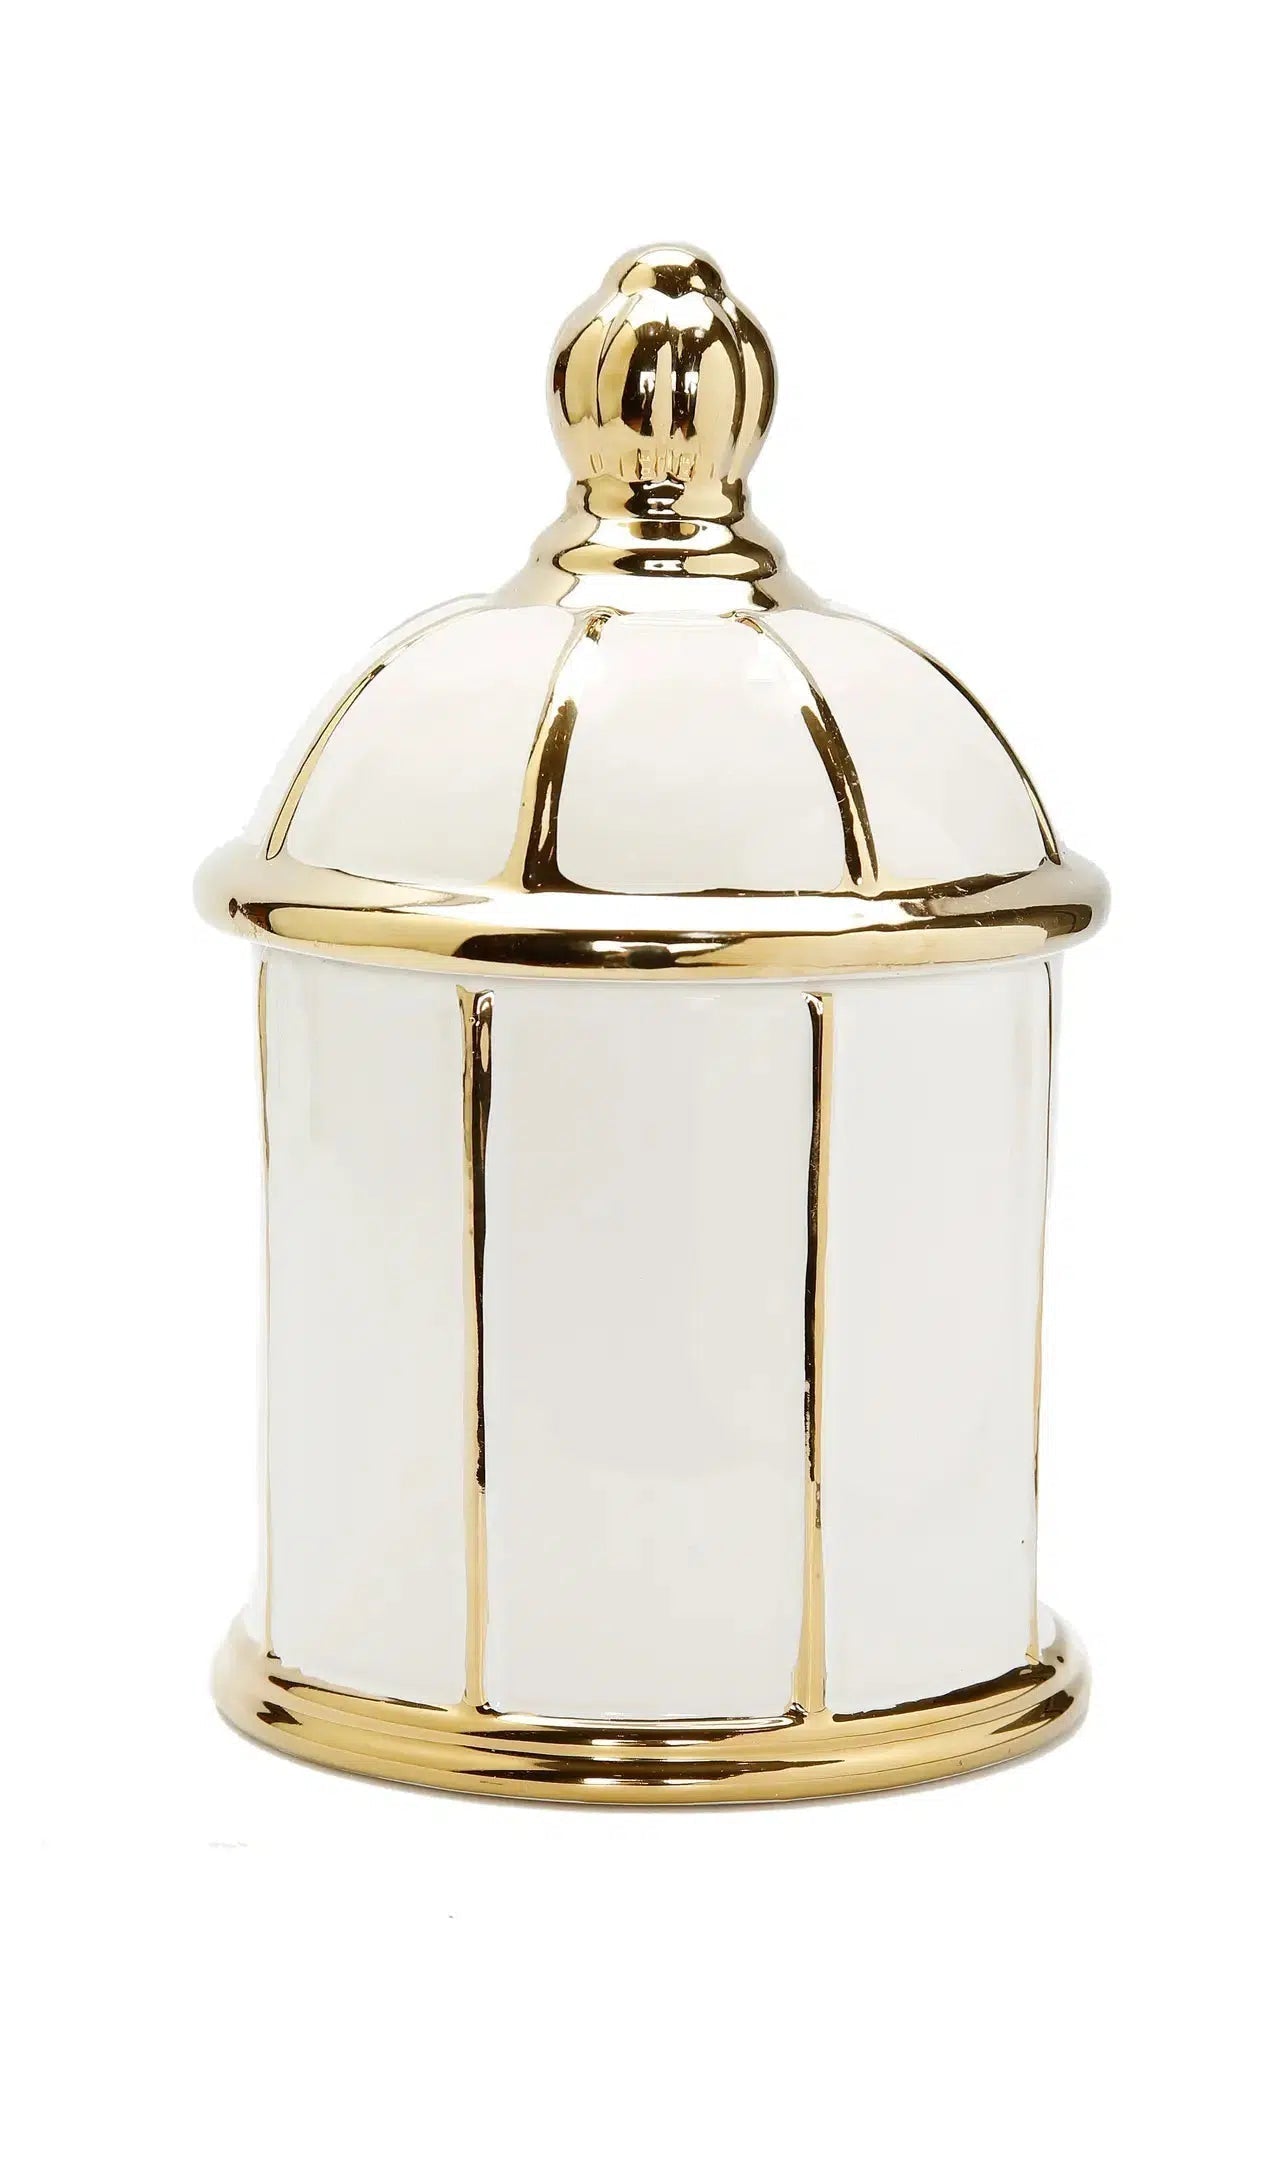 White Jar with Round Dome Cover Thin Gold Stripe Design Decorative Jars High Class Touch - Home Decor Short 